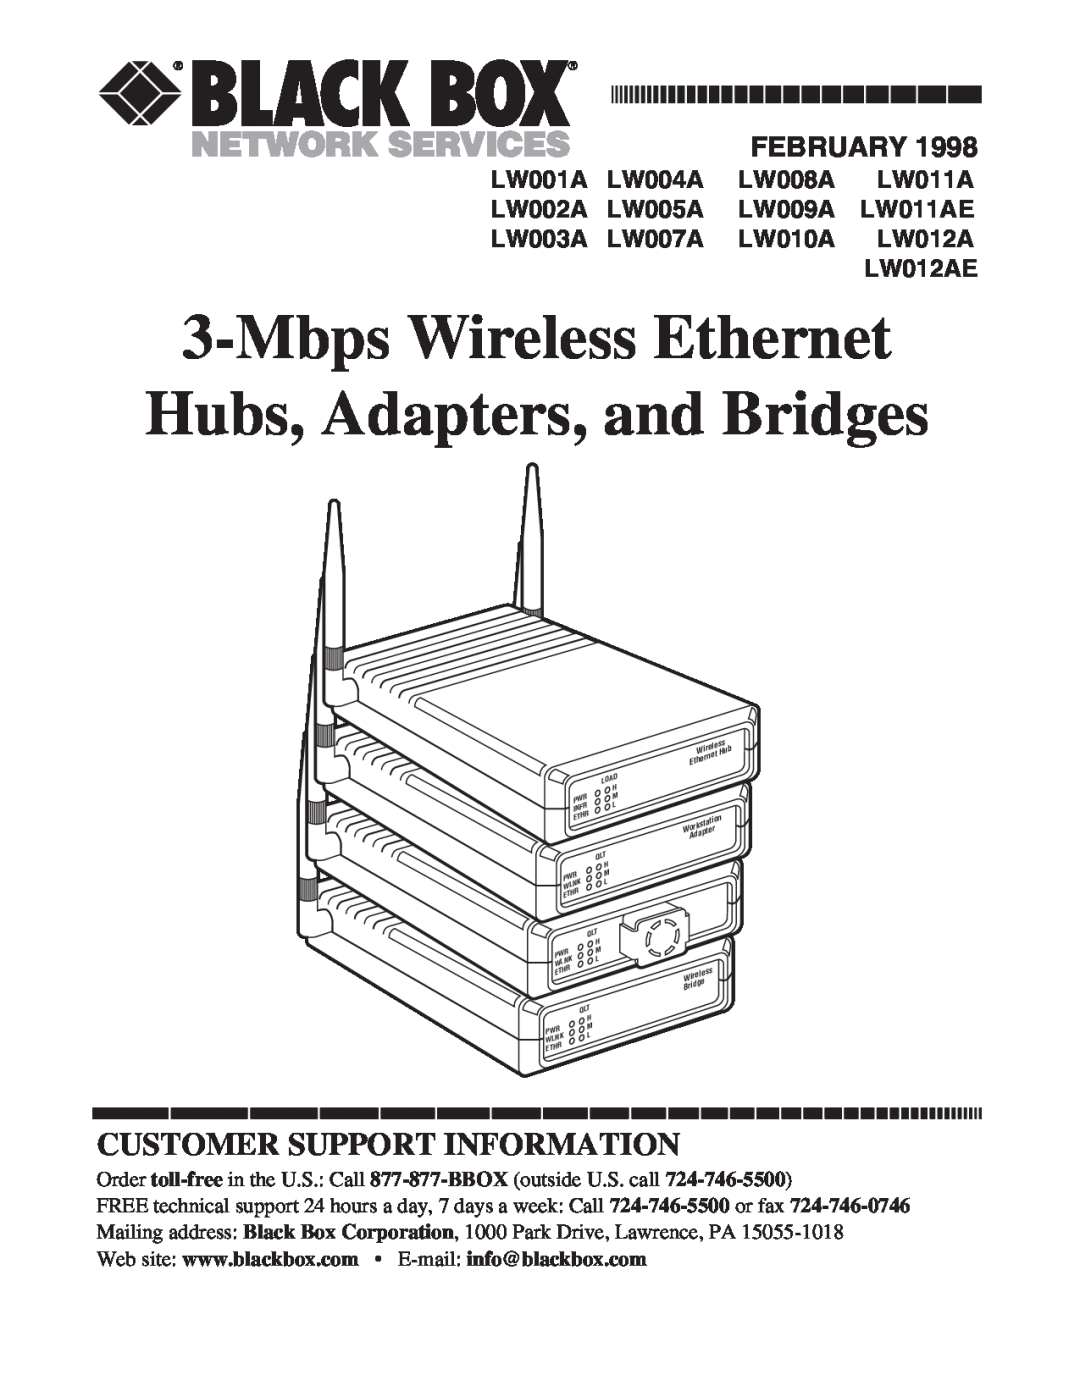 Black Box LW012AE manual Mbps Wireless Ethernet Hubs, Adapters, and Bridges, Customer Support Information, February 